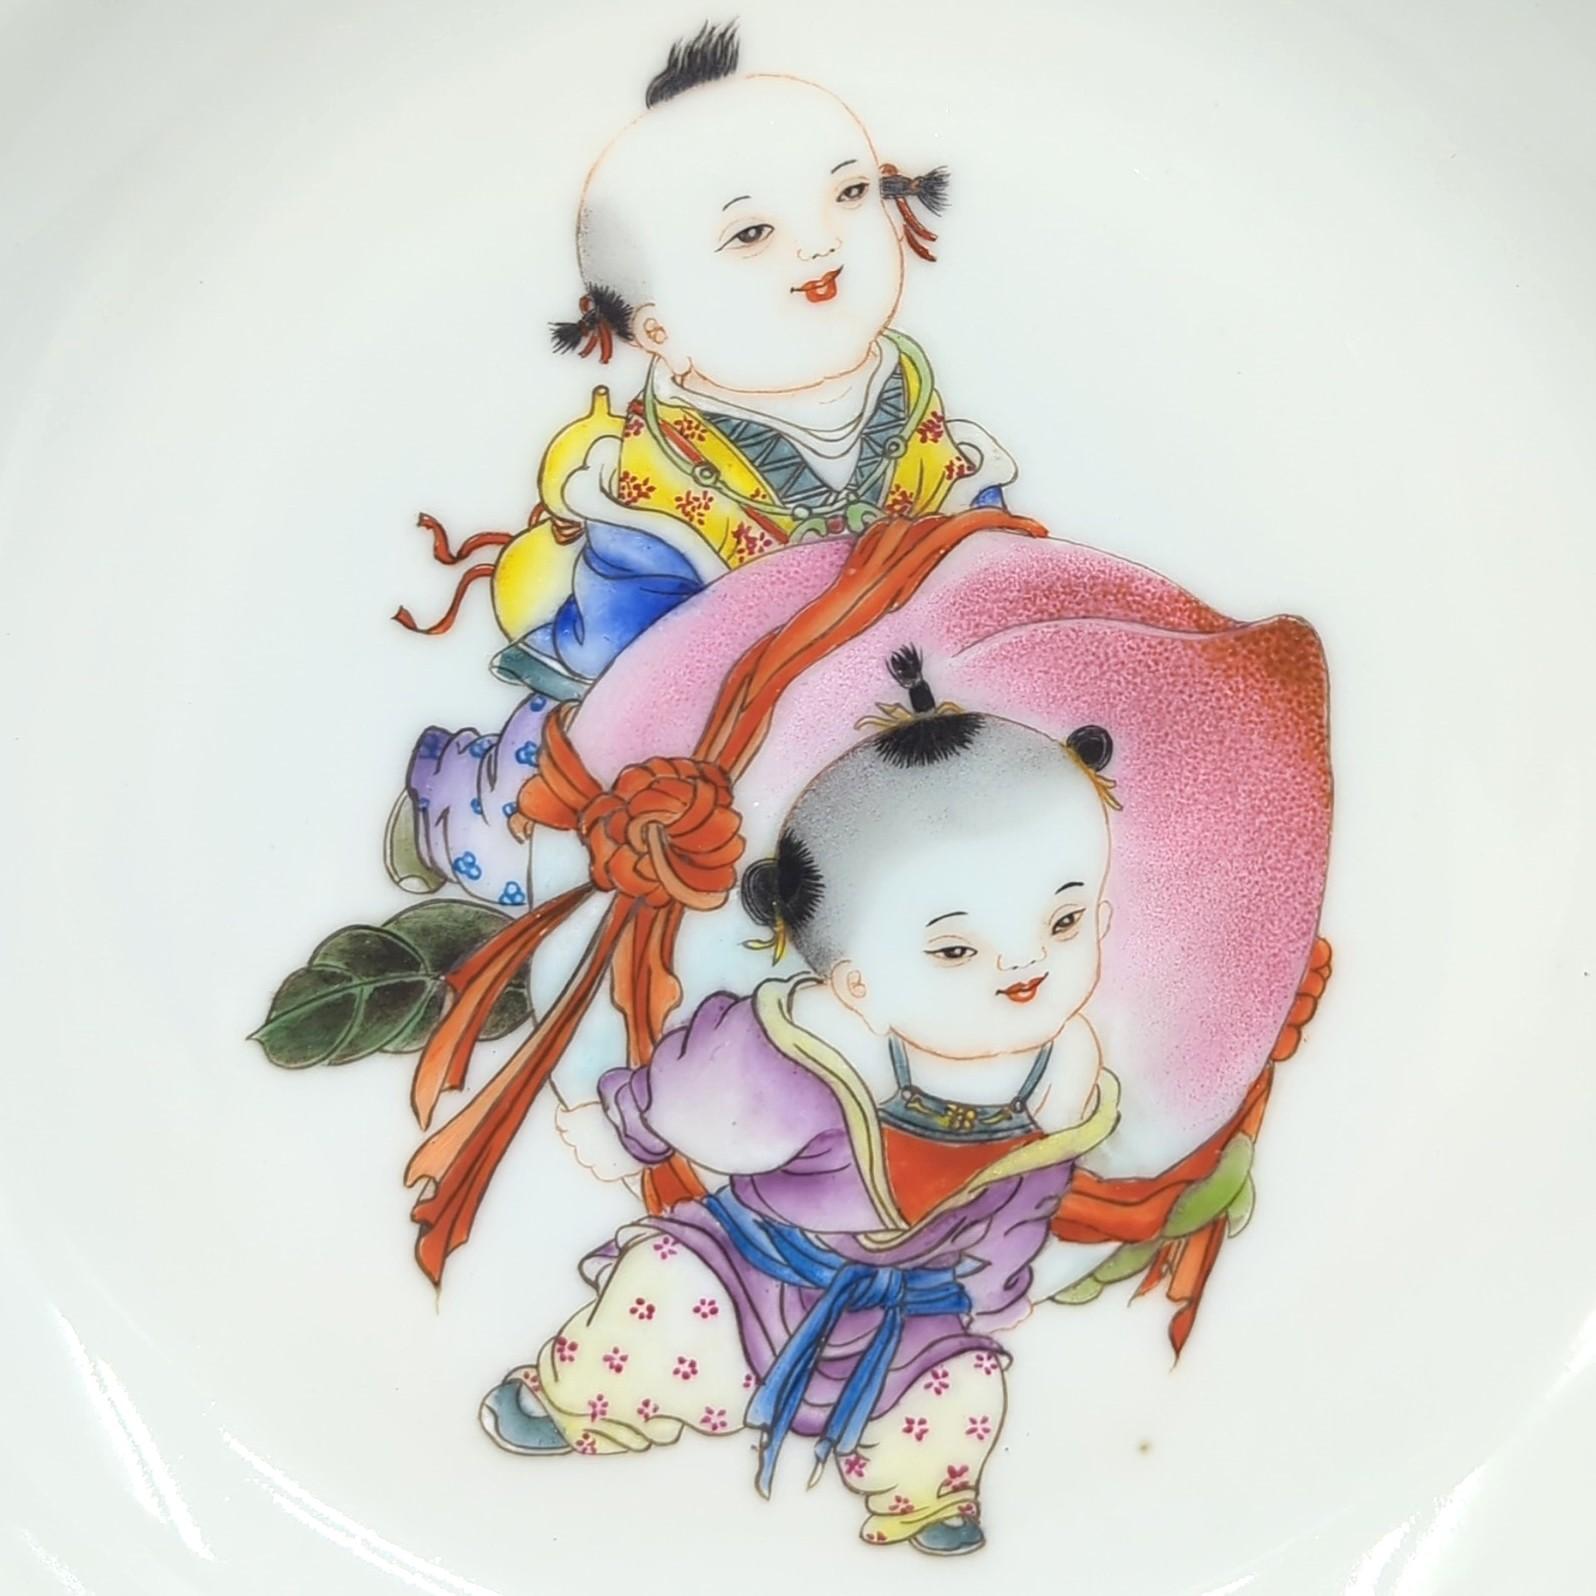 This Chinese porcelain plate, dating from the early 20th century Republic period, is a remarkable representation of both artistic skill and cultural symbolism. The plate features a meticulously executed scene of two boys in traditional Chinese